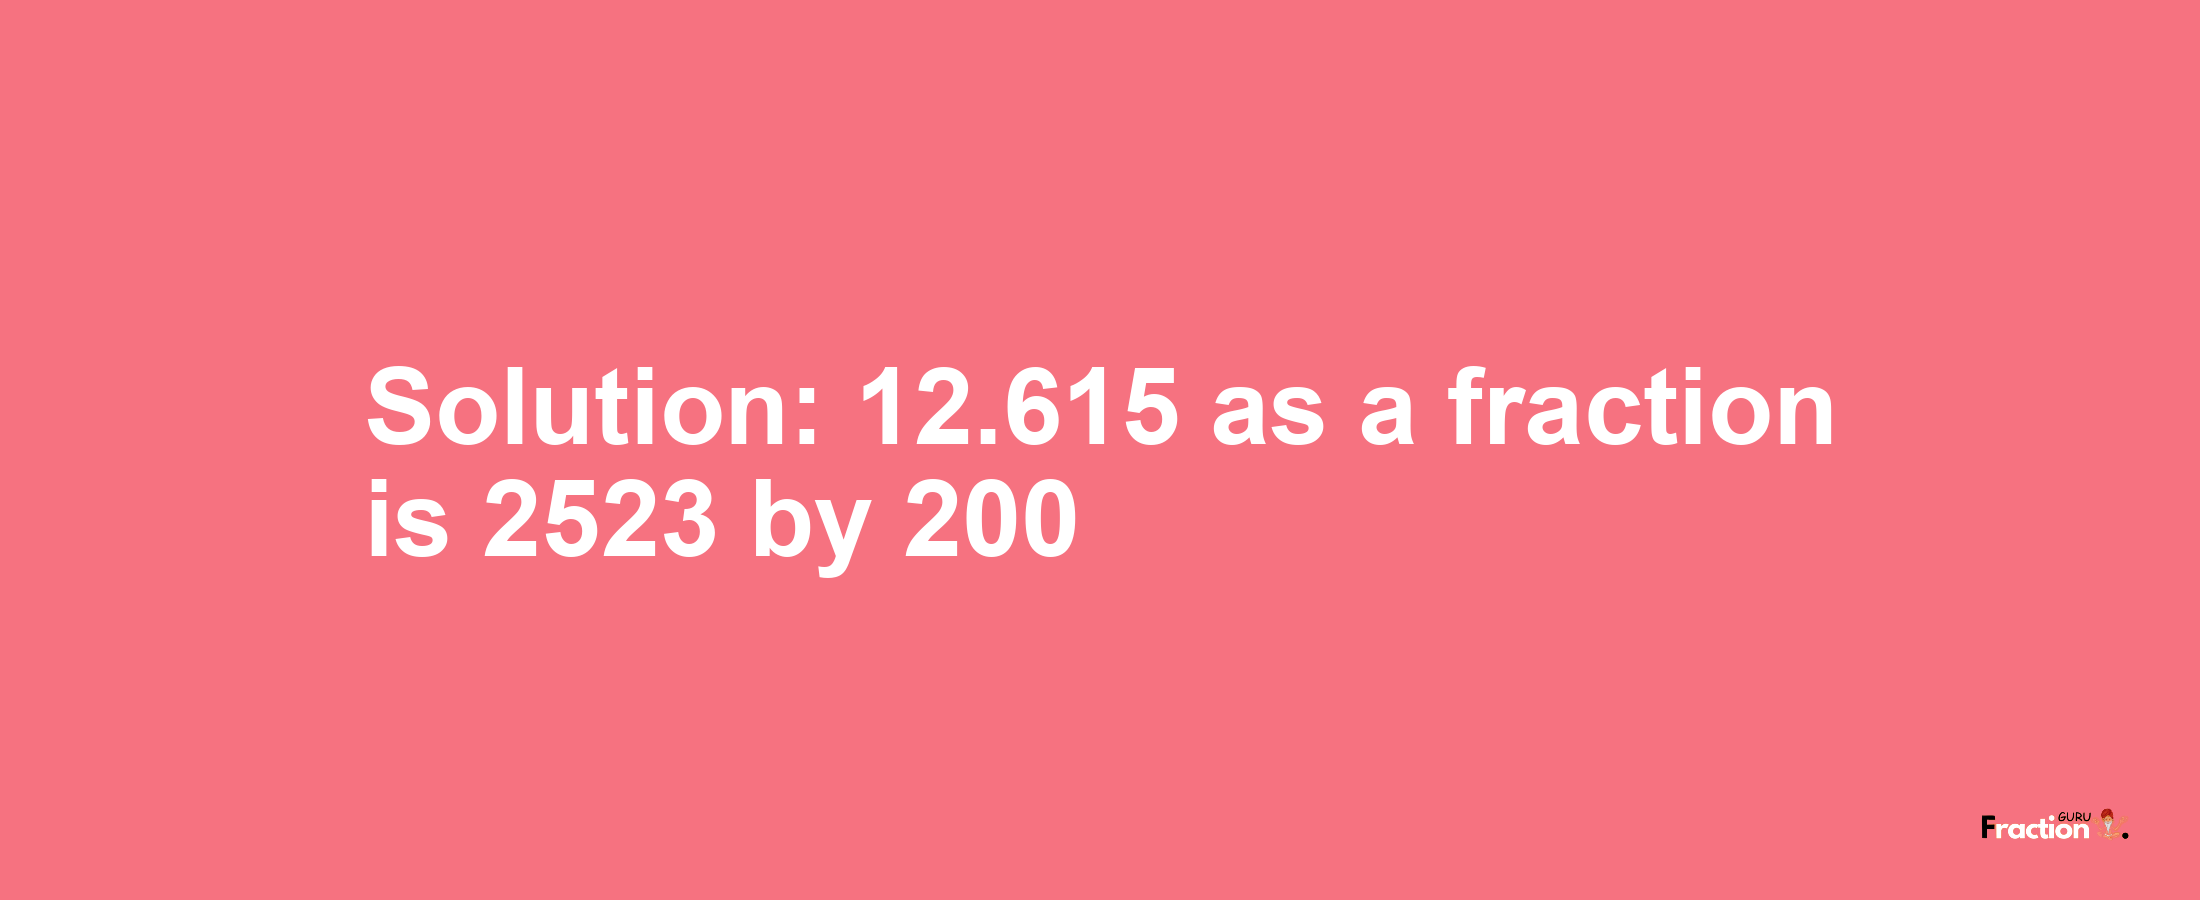 Solution:12.615 as a fraction is 2523/200